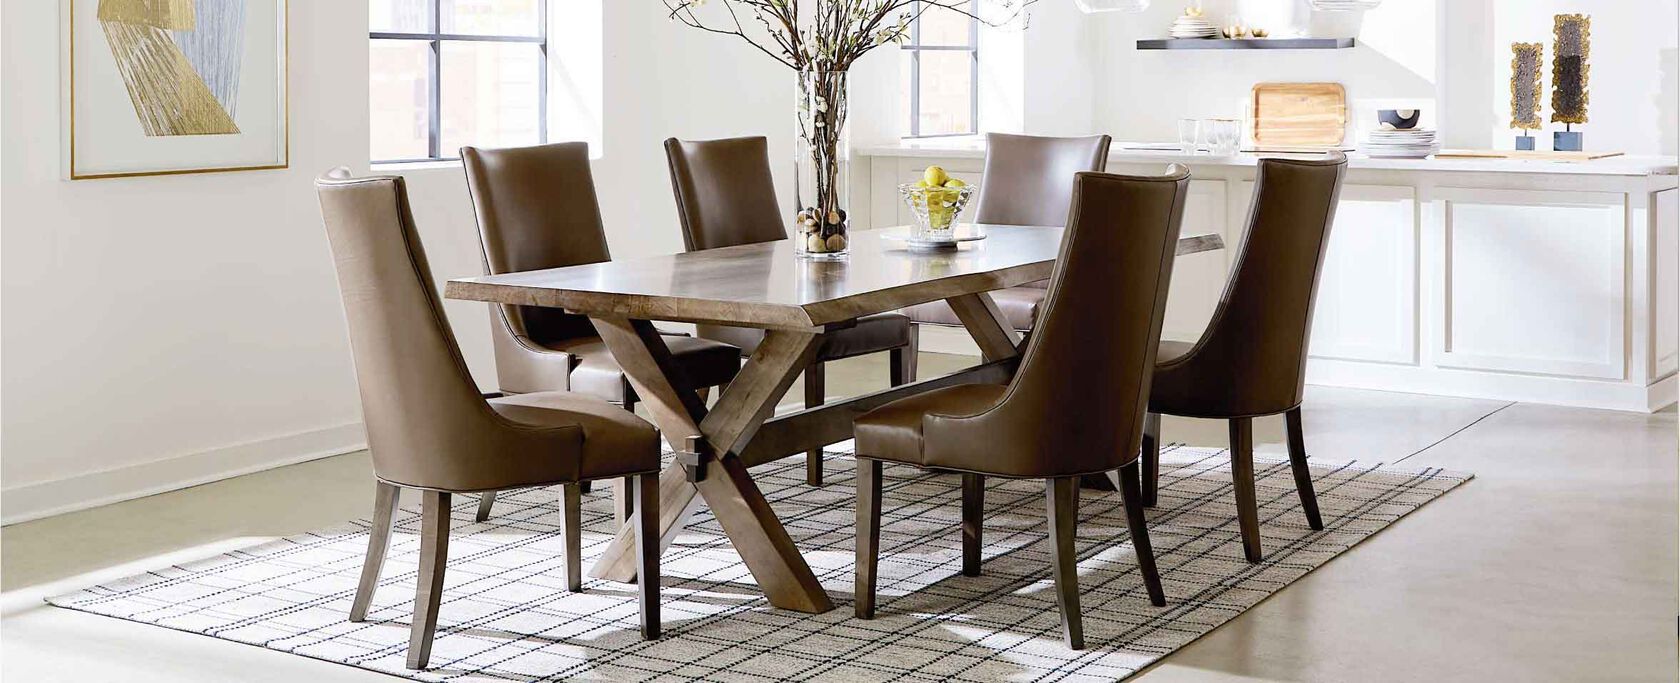 Crossbuck dining table with leather chairs